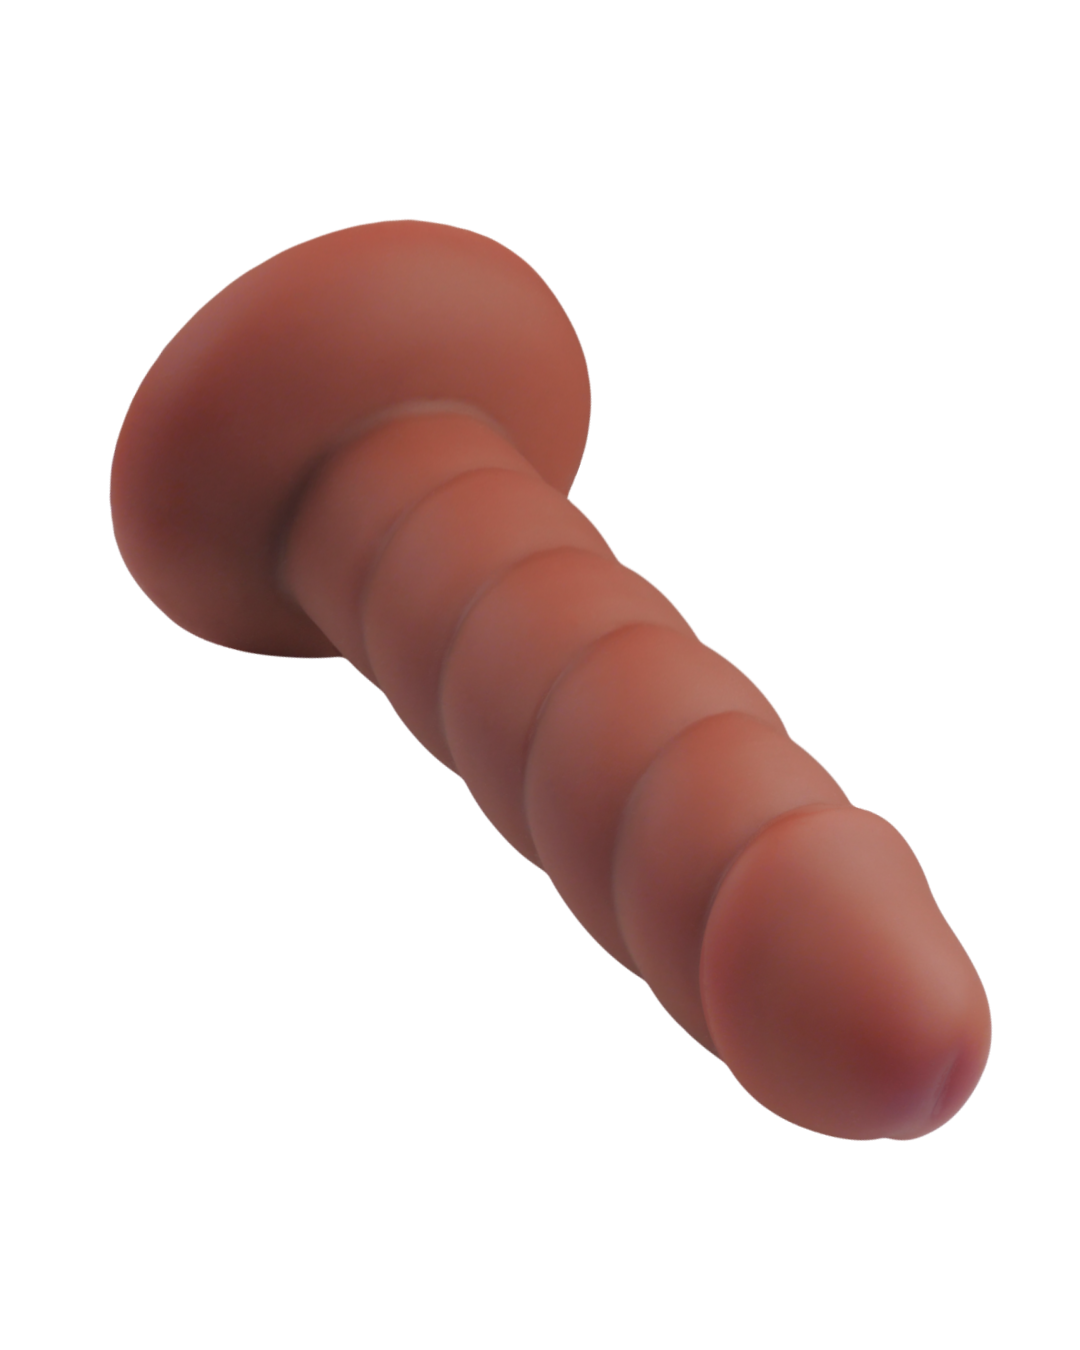 Suga Daddy 5.5 Inch Swirled Brown Silicone Dildo front view on angle 